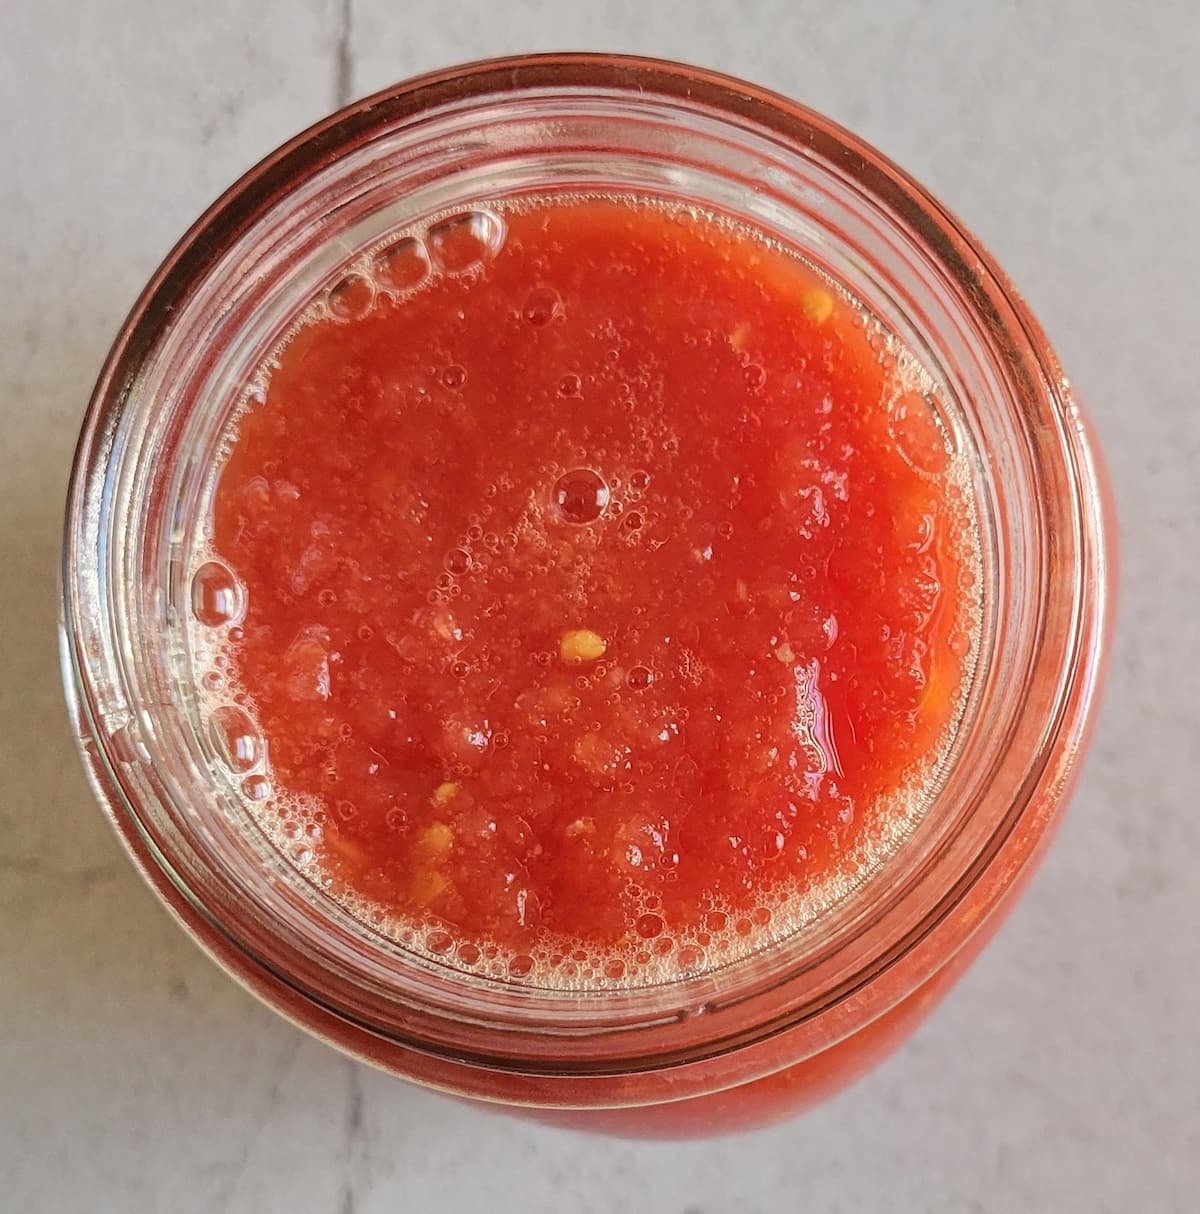 tomato sauce in a jar